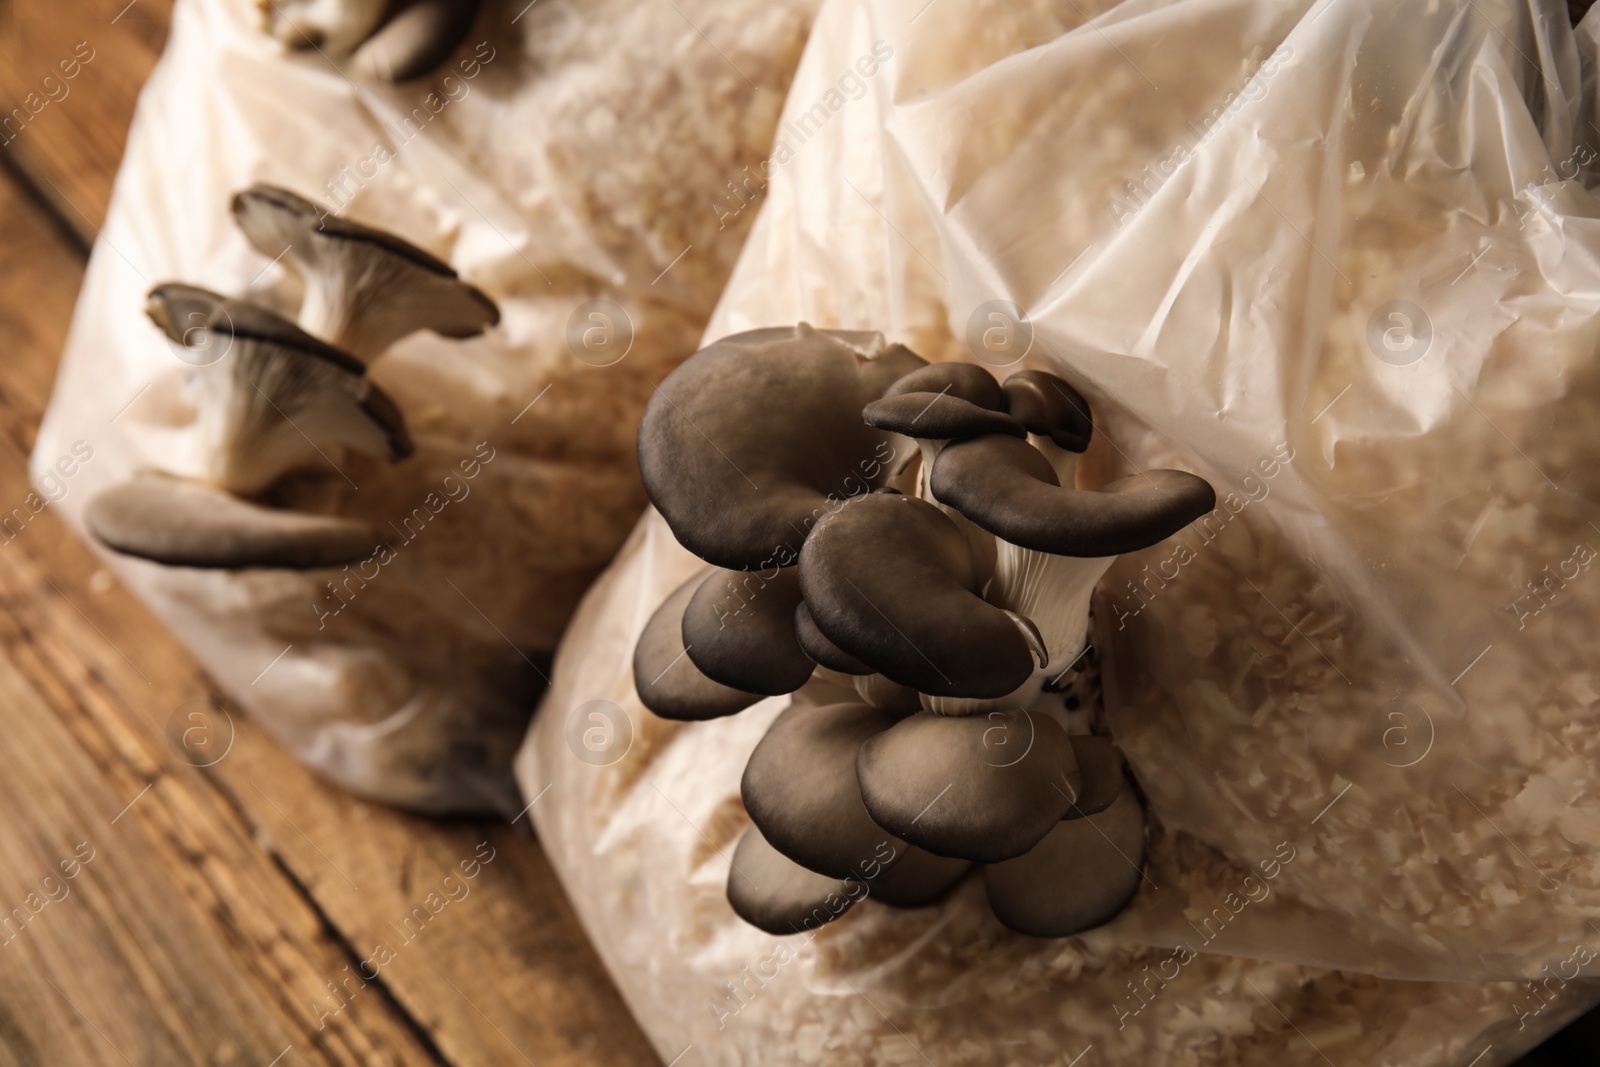 Photo of Oyster mushrooms growing in sawdust, closeup. Cultivation of fungi